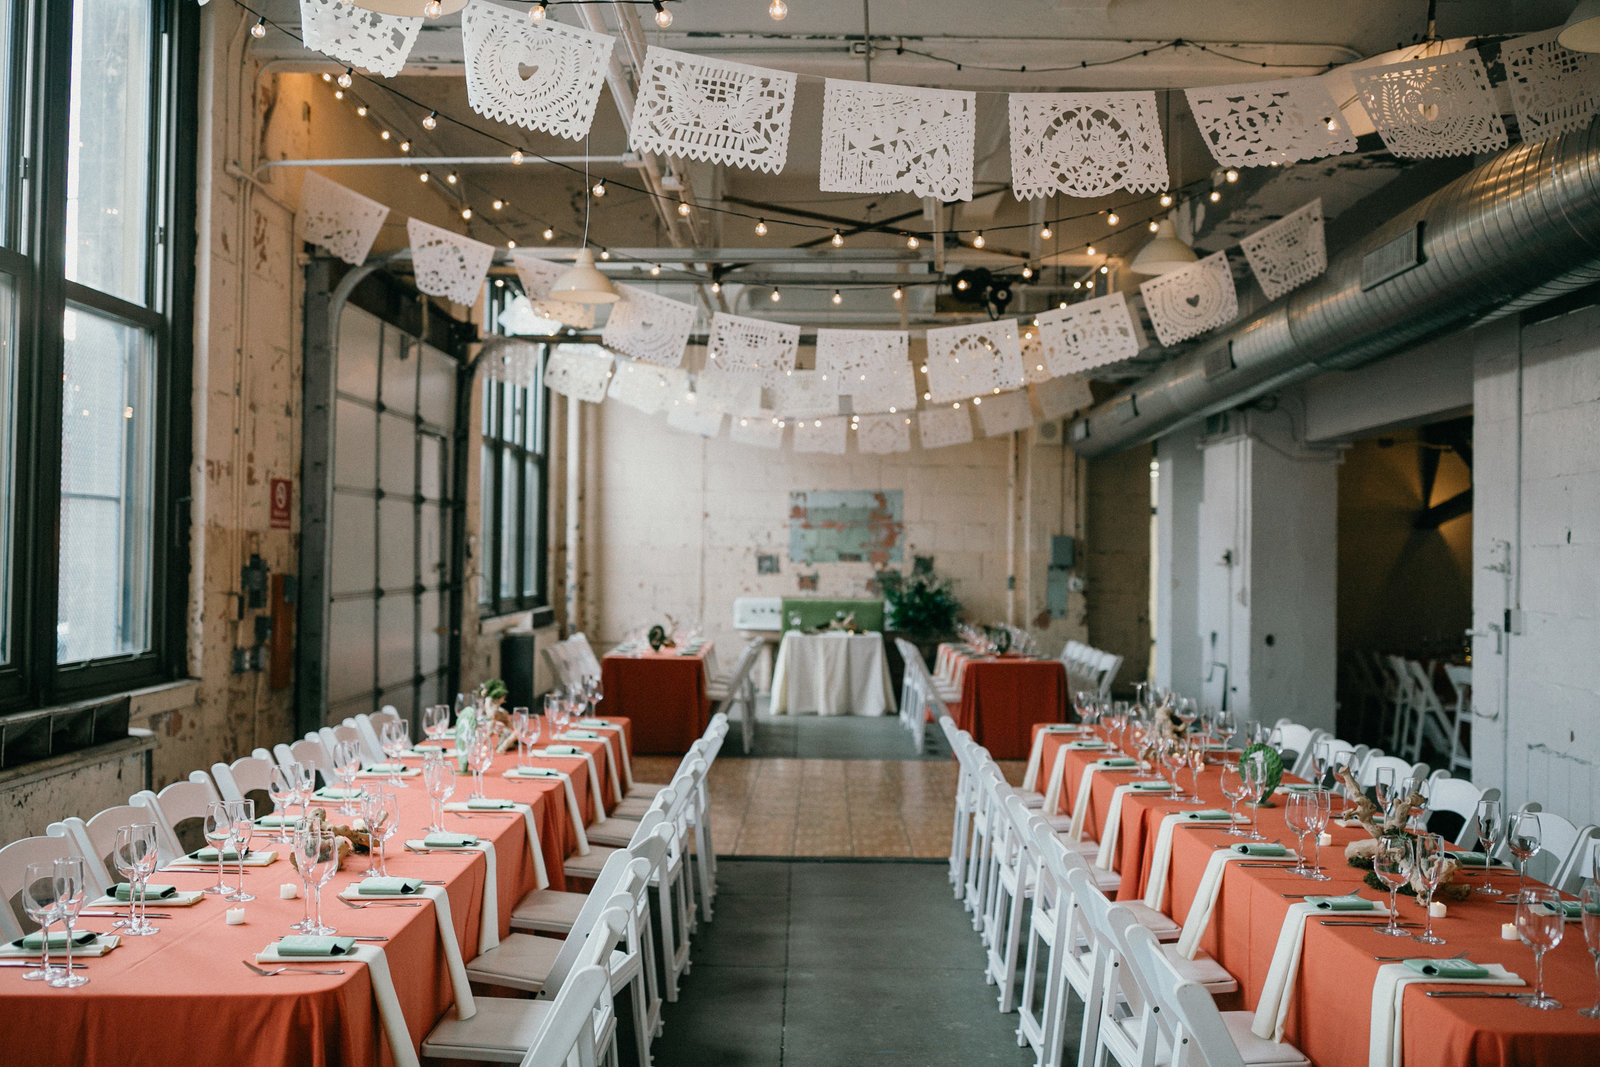 An alternative wedding at Bok, full of creative and off-beat ideas.